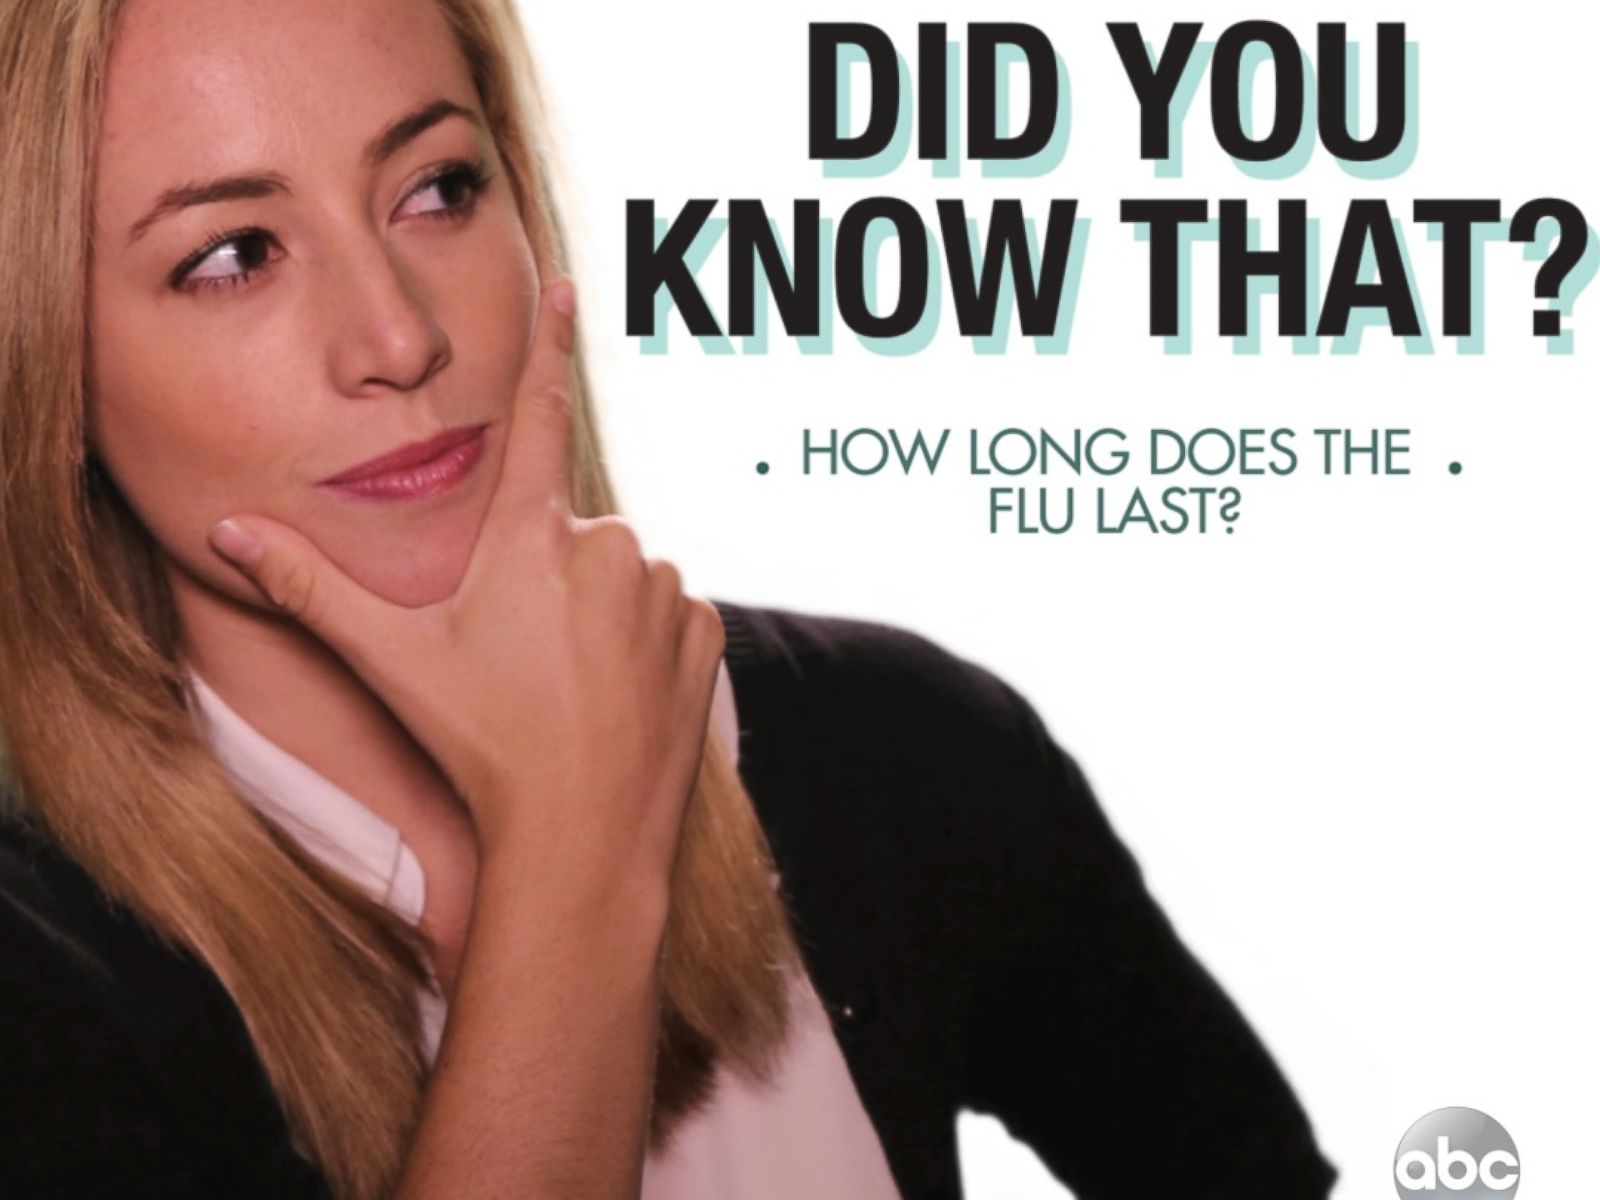 How long does the flu last? Good Morning America